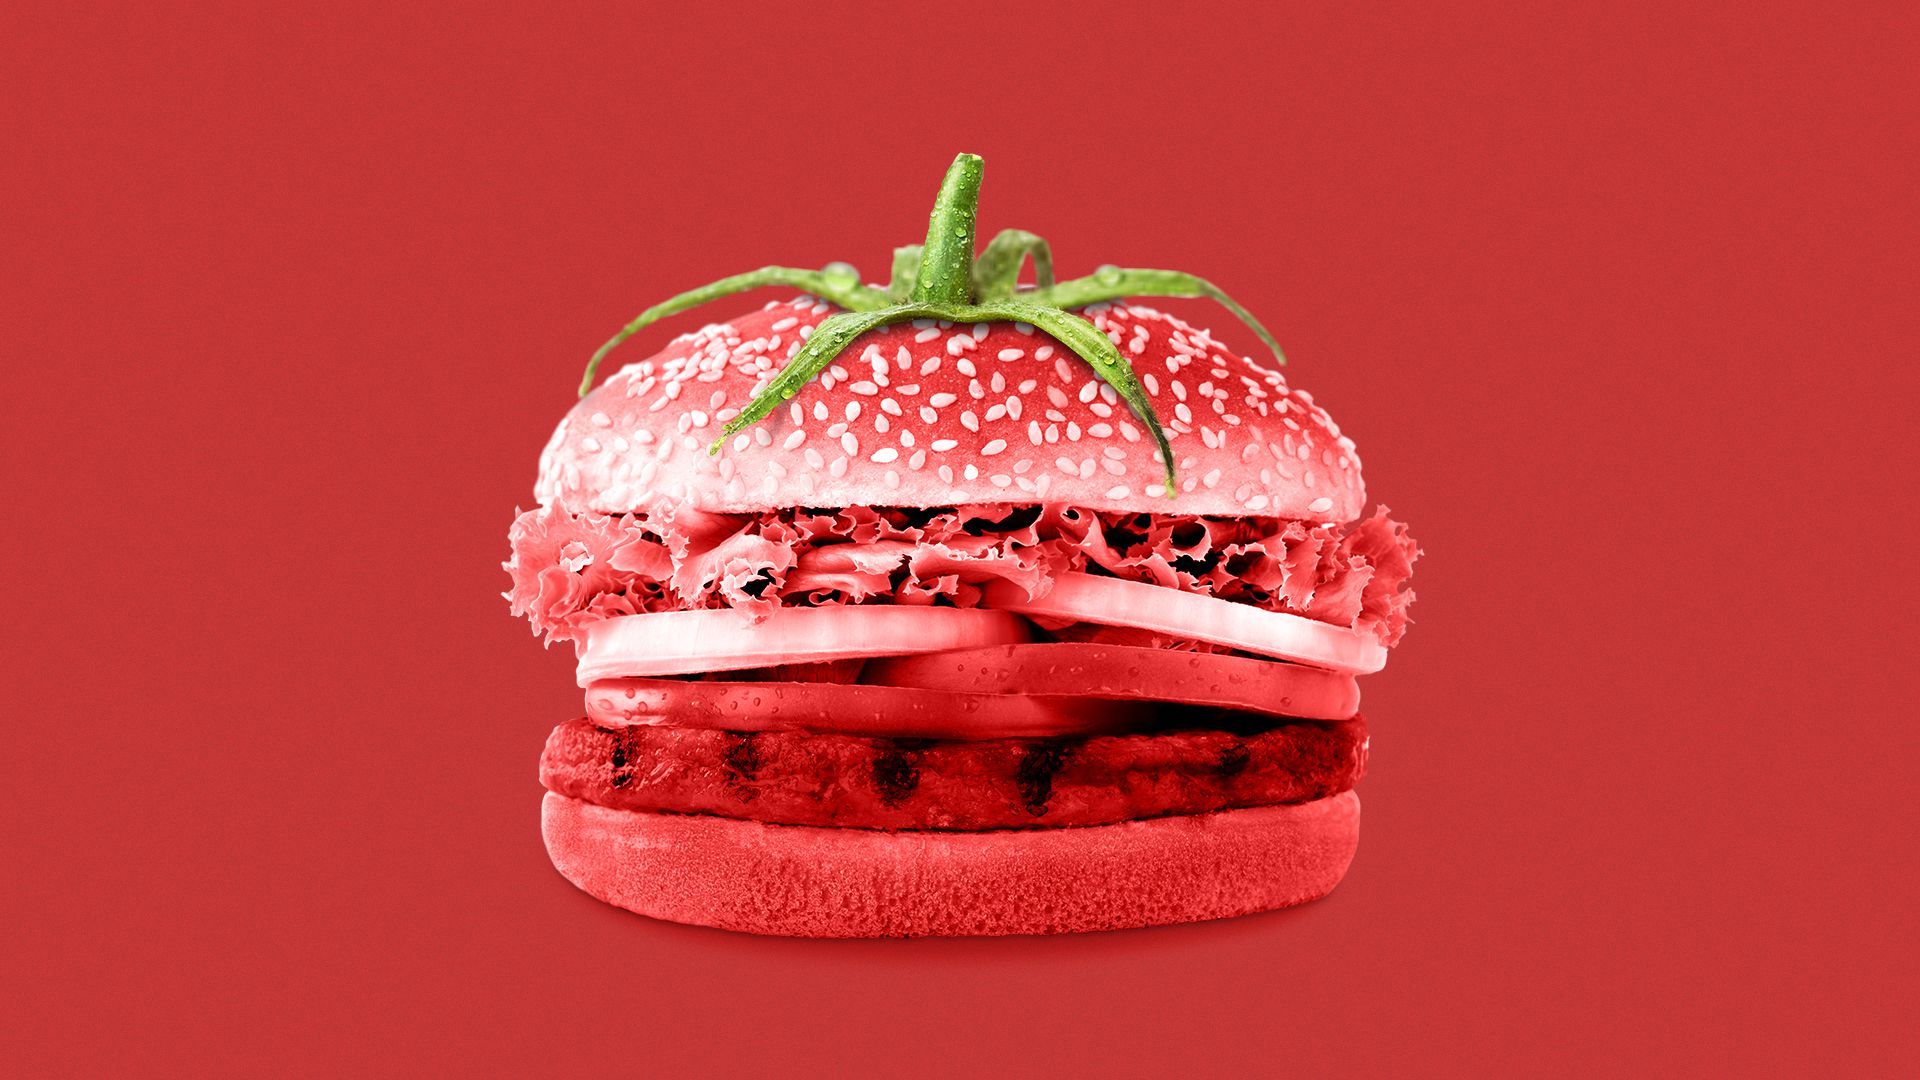 Illustration of a red burger with a green stem, resembling a tomato.